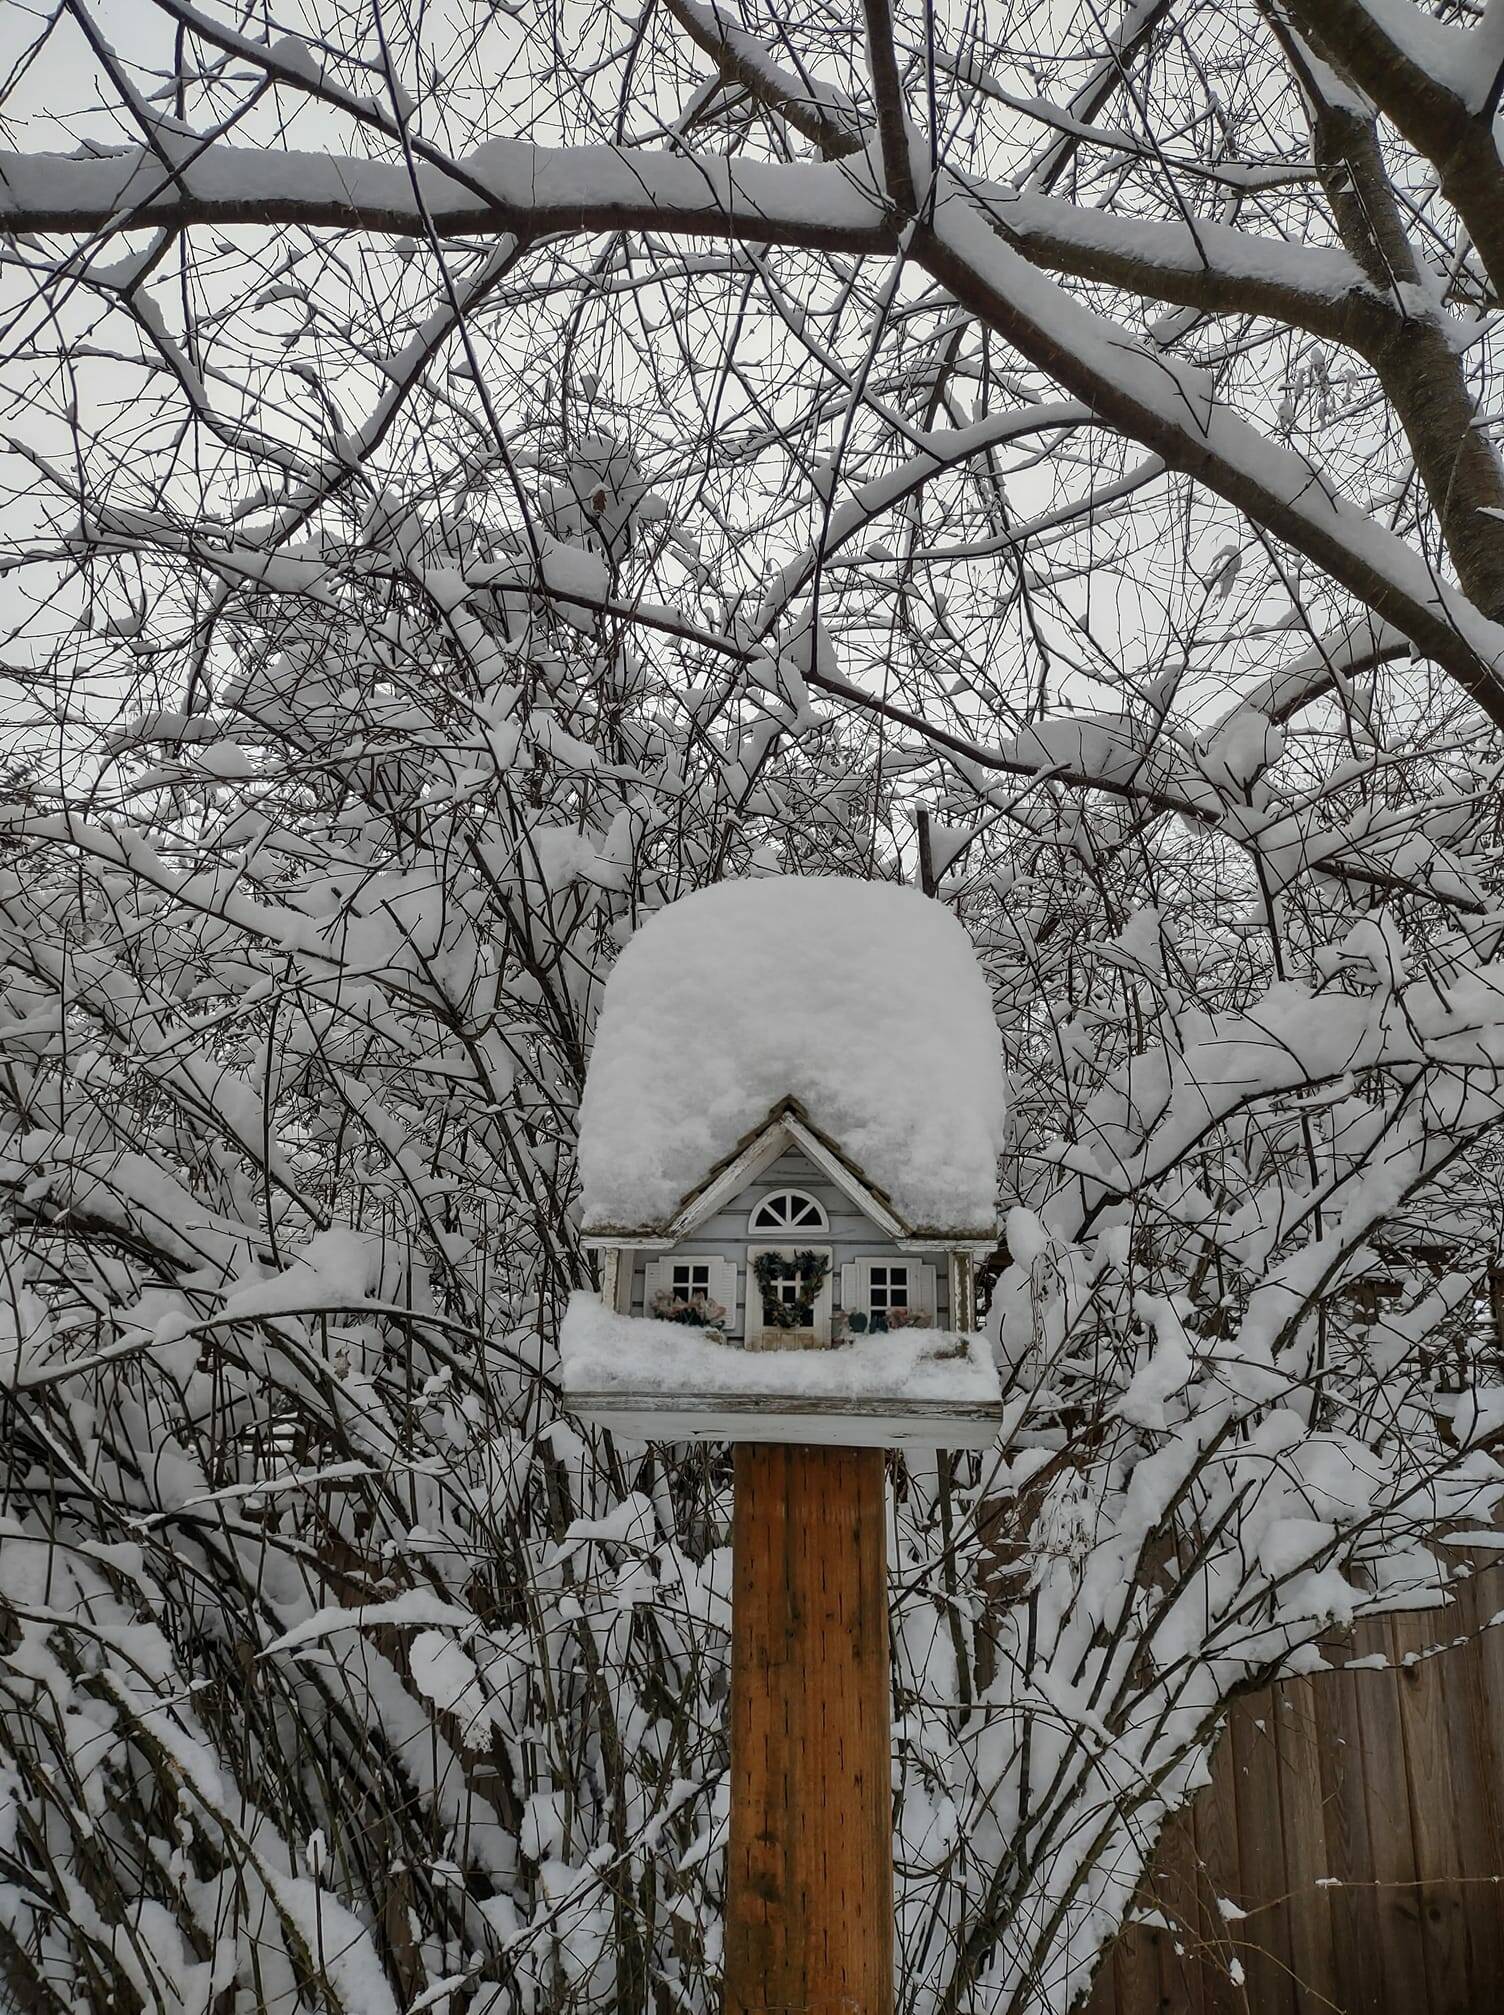 Tonja Oker Sturdevant submitted a photo of a mailbox in the snow.